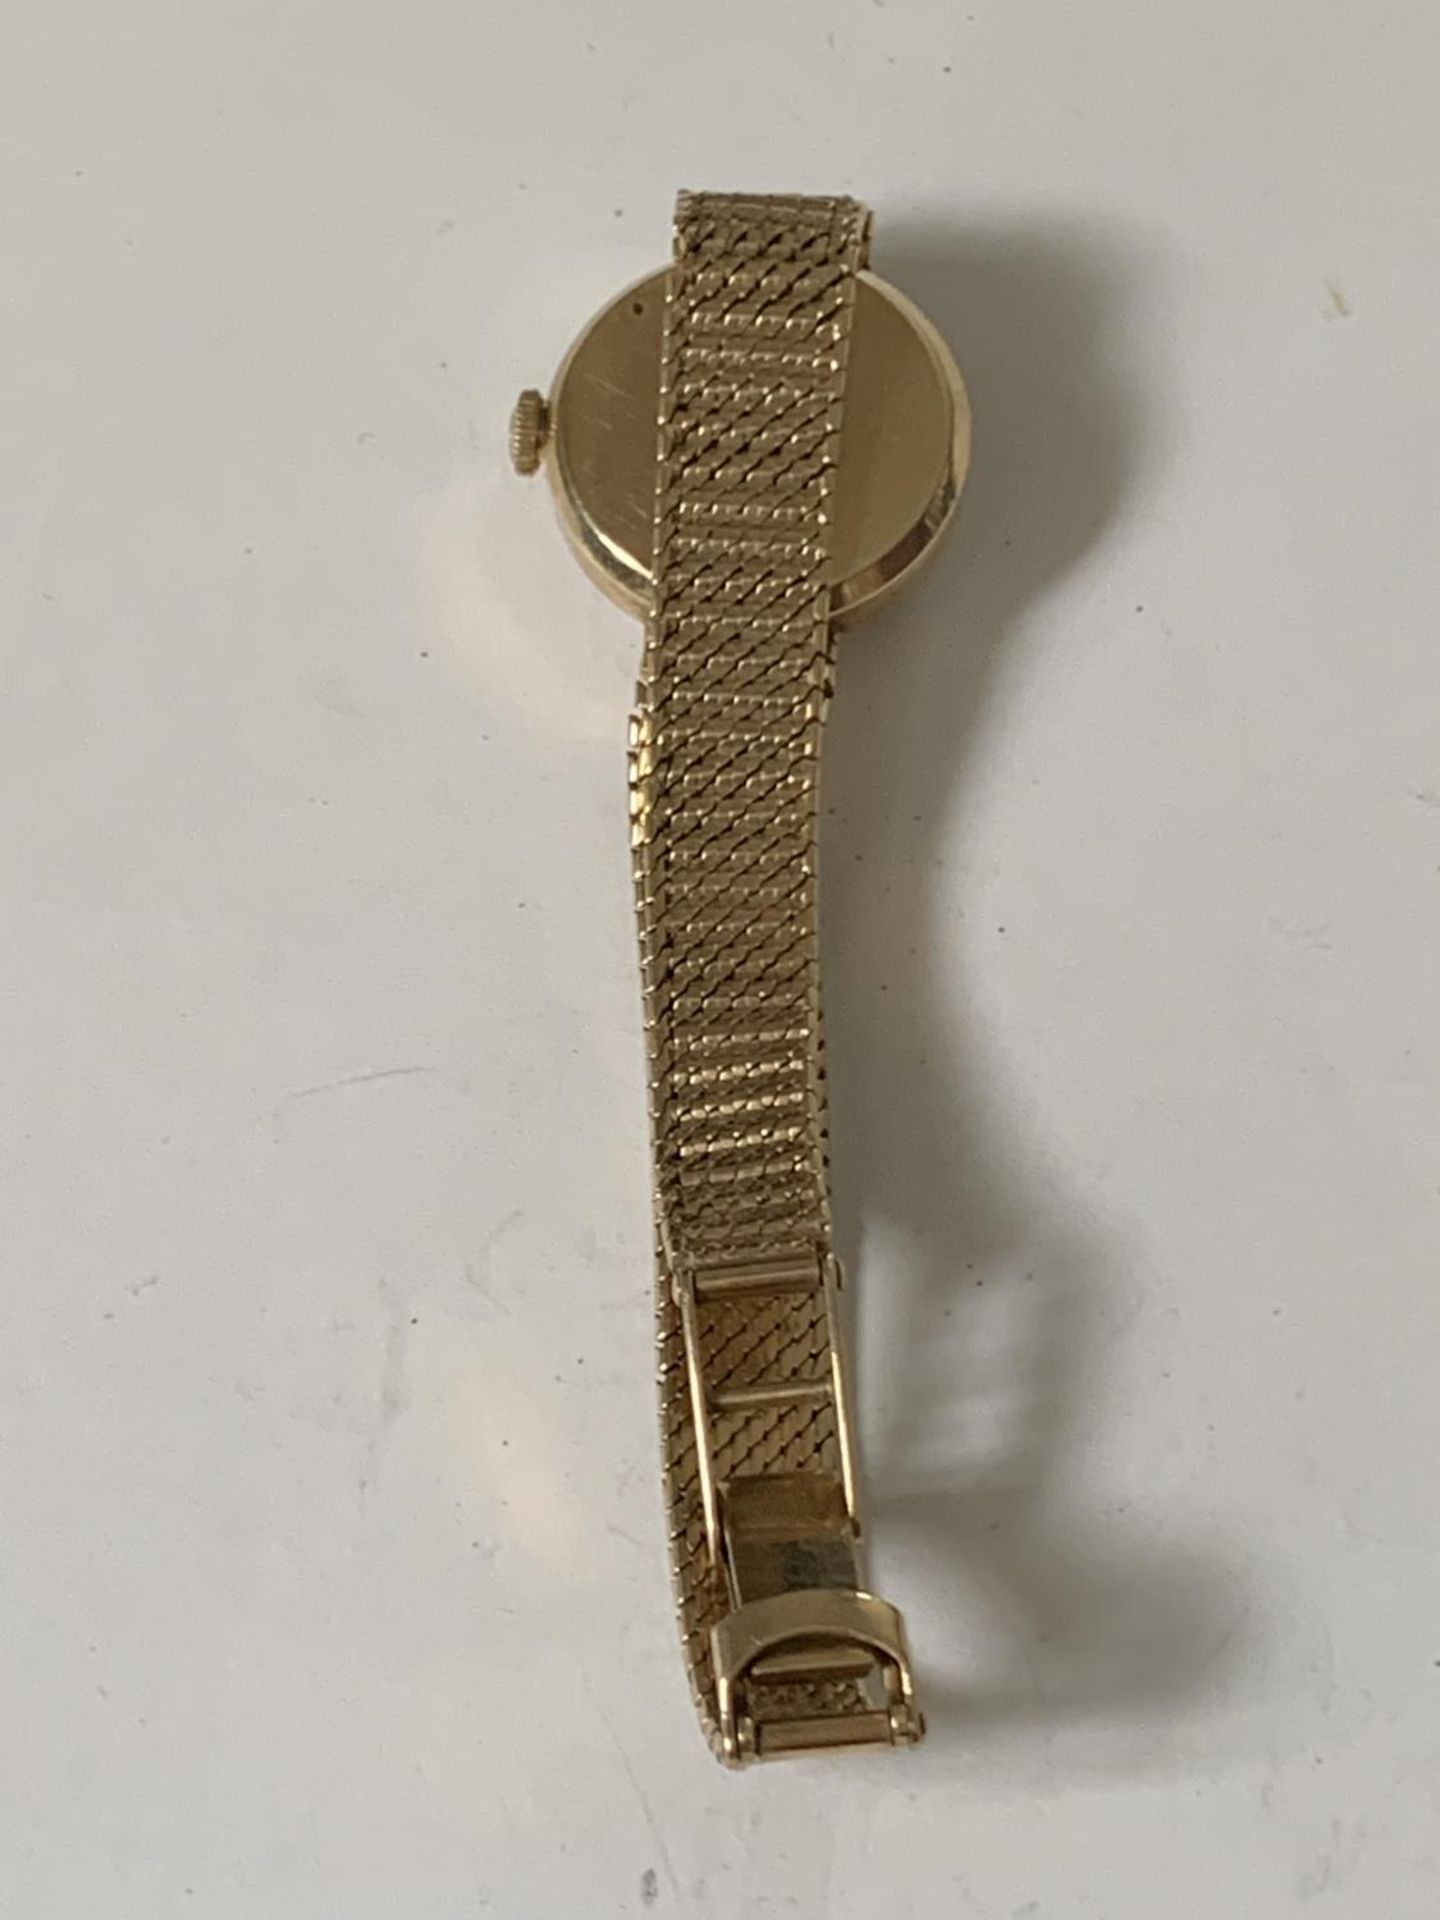 A LADIES VINTAGE 9 CARAT GOLD WRIST WATCH WITH 9 CARAT GOLD STRAP GROSS WEIGHT 16.86 GRAMS - Image 2 of 4